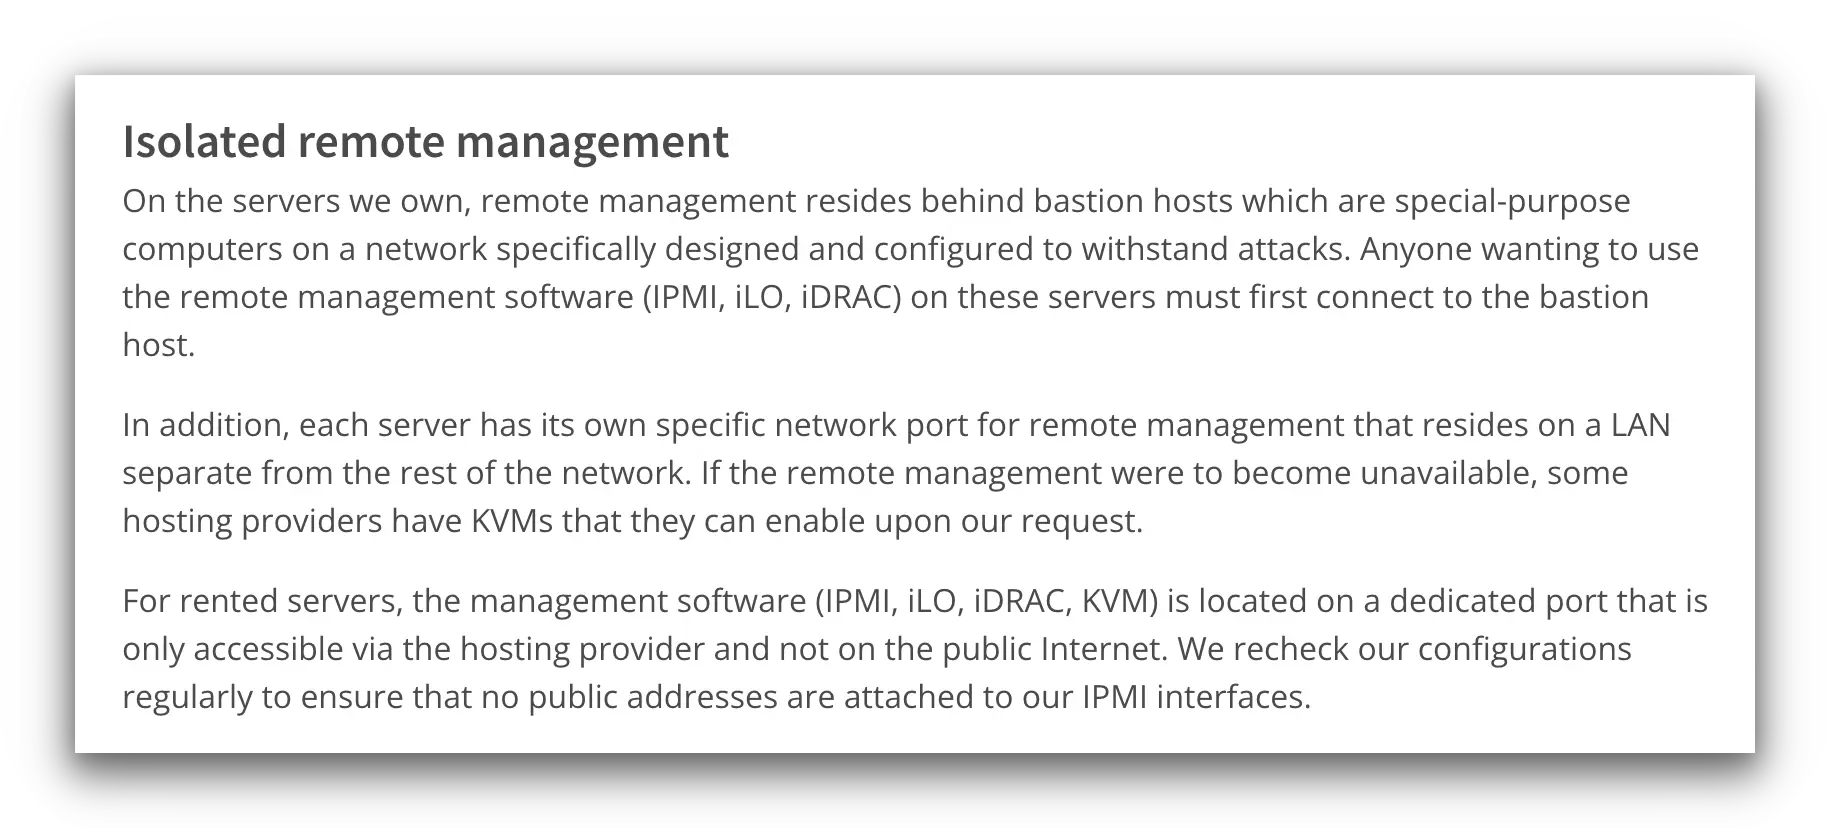 Mullvad's server remote management policy